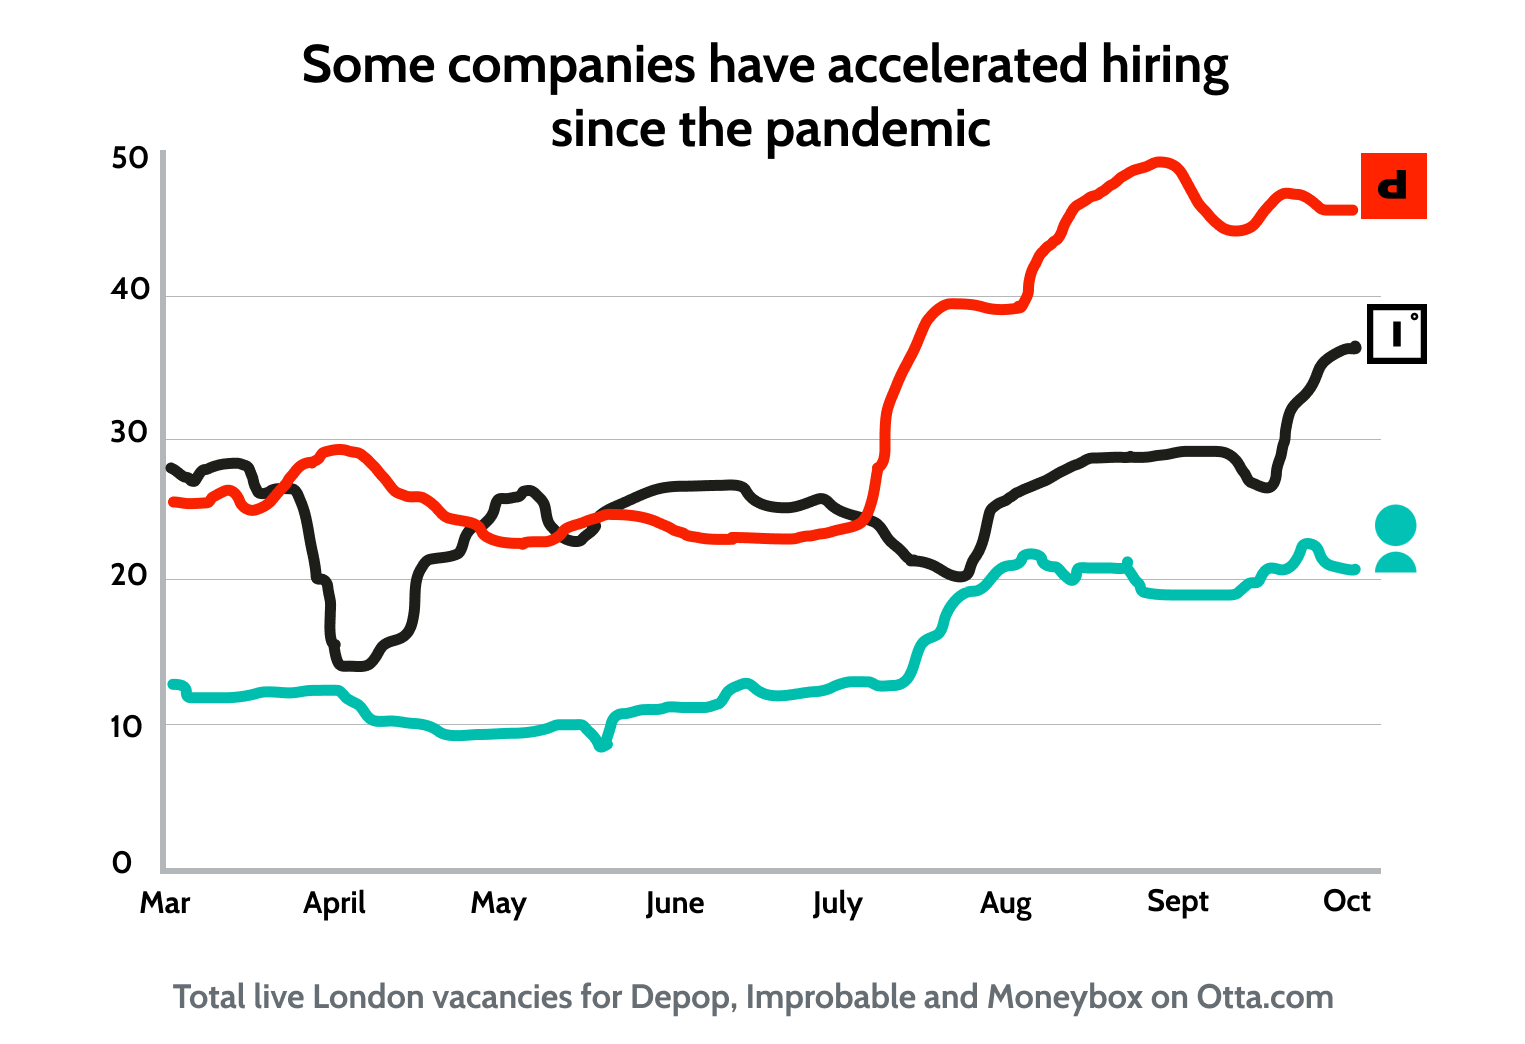 Some companies have accelerated hiring since the pandemic began.